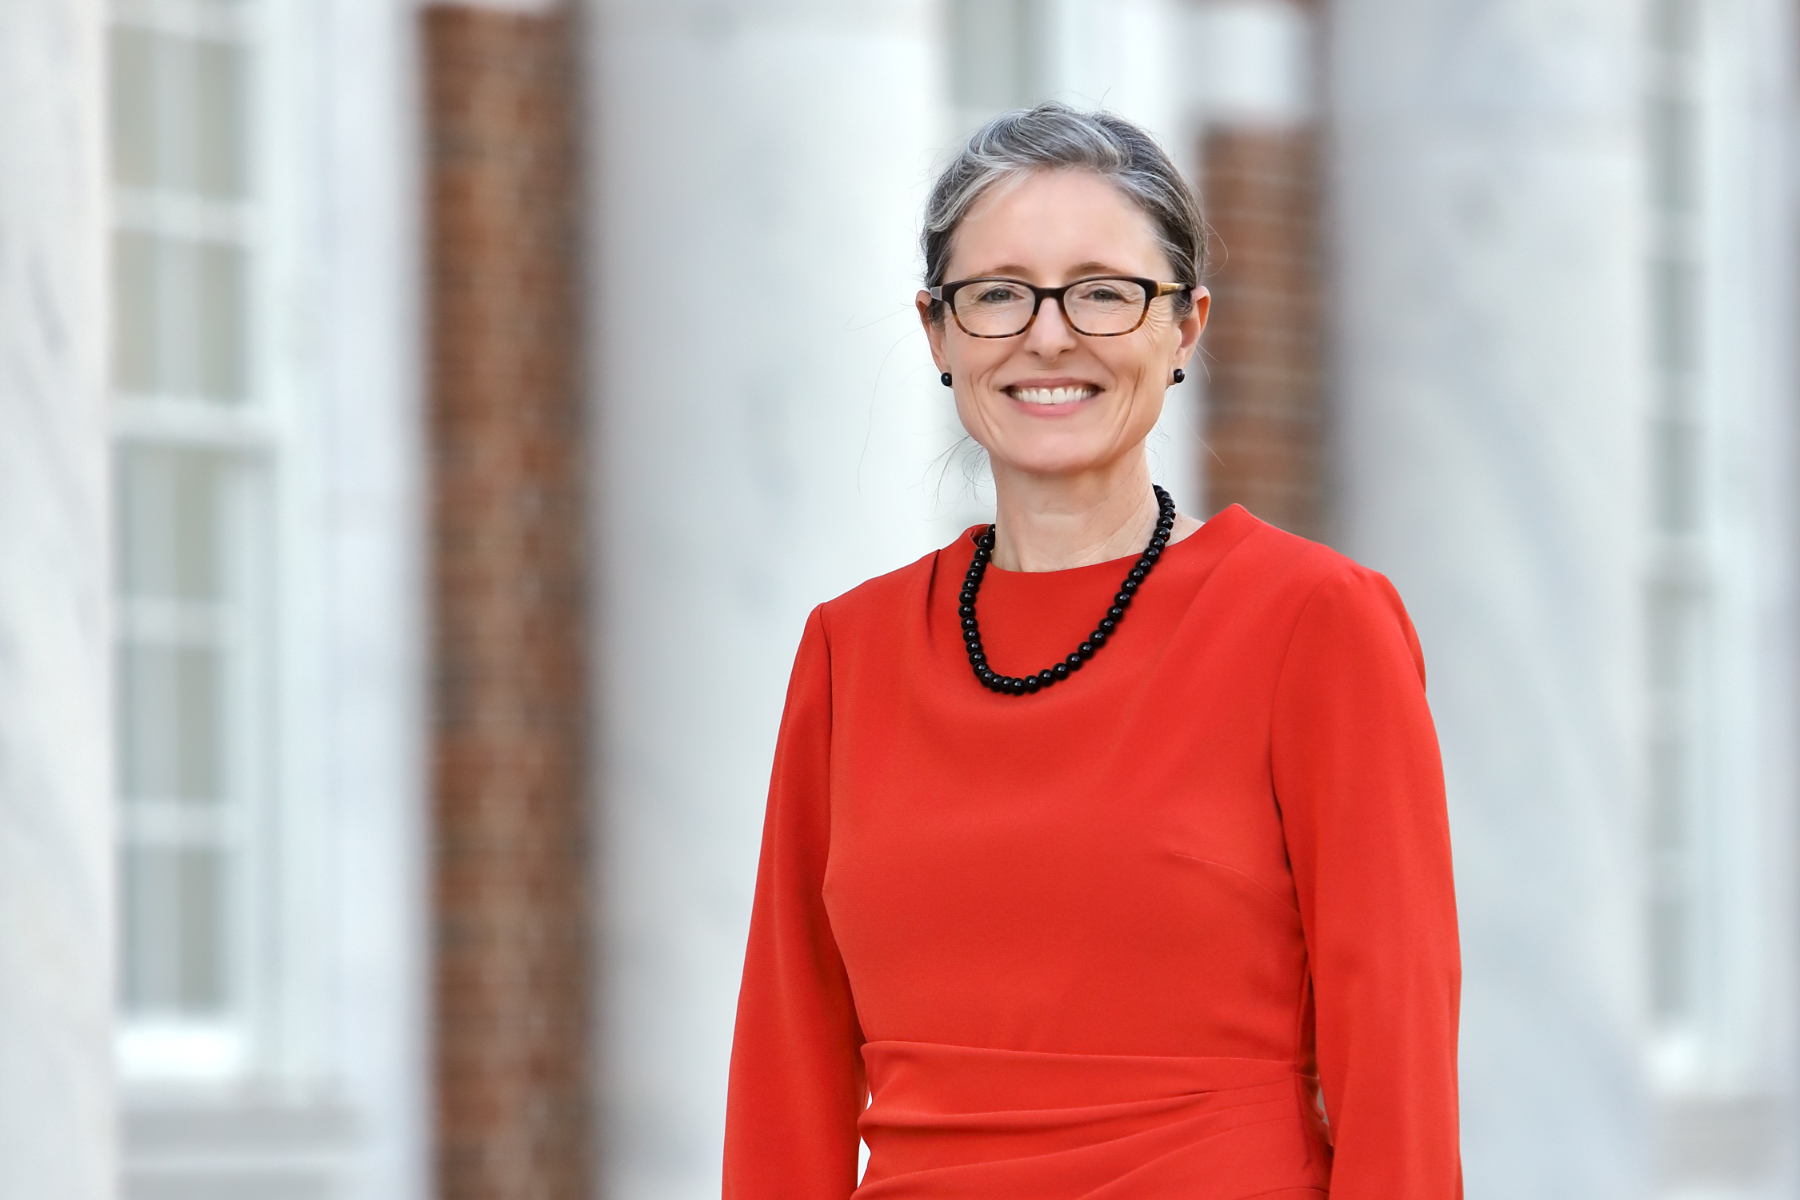 Mercer Law dean has love of education and teaching